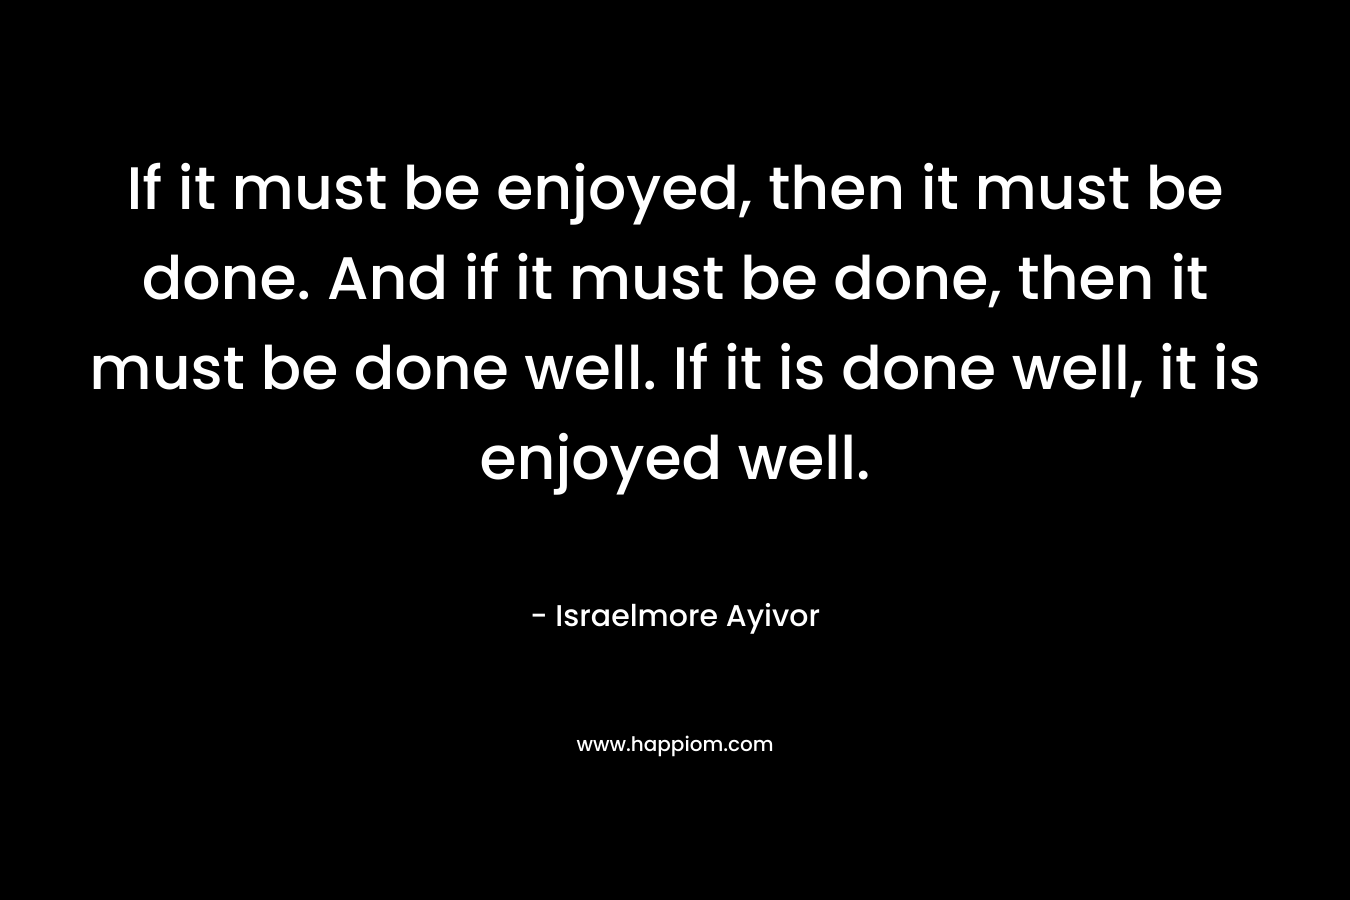 If it must be enjoyed, then it must be done. And if it must be done, then it must be done well. If it is done well, it is enjoyed well.